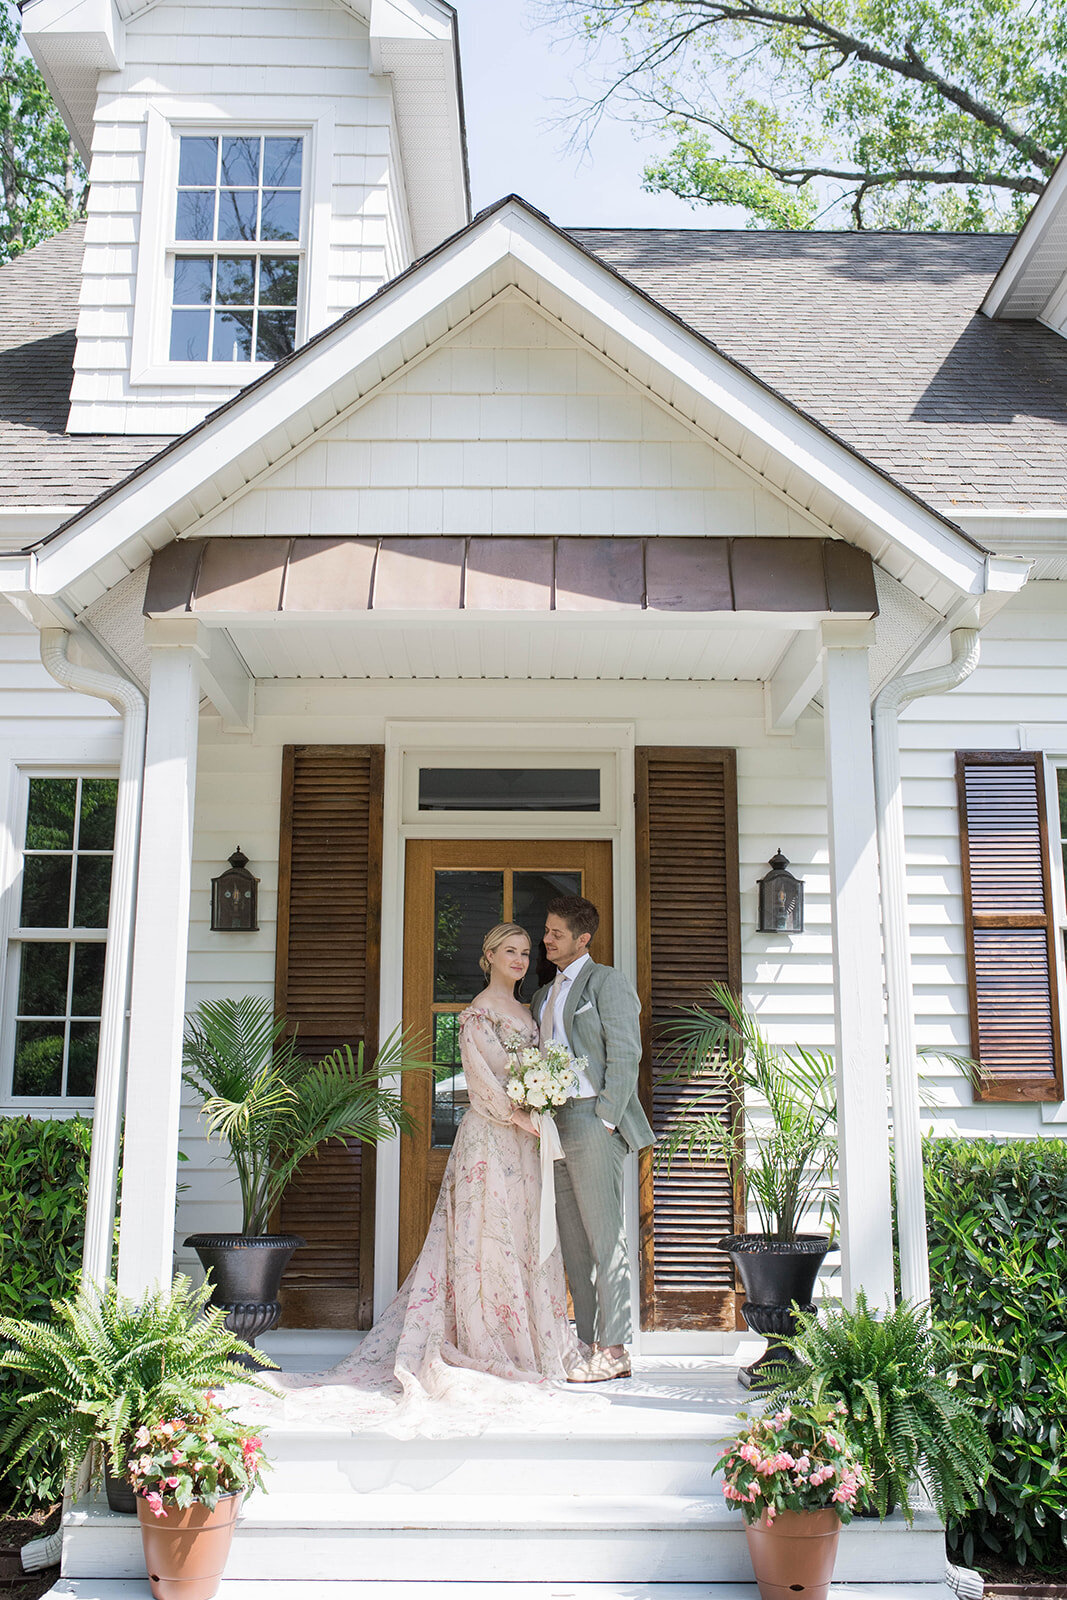 Bride and groom posing on the front porch, bride holding a white bouquet.